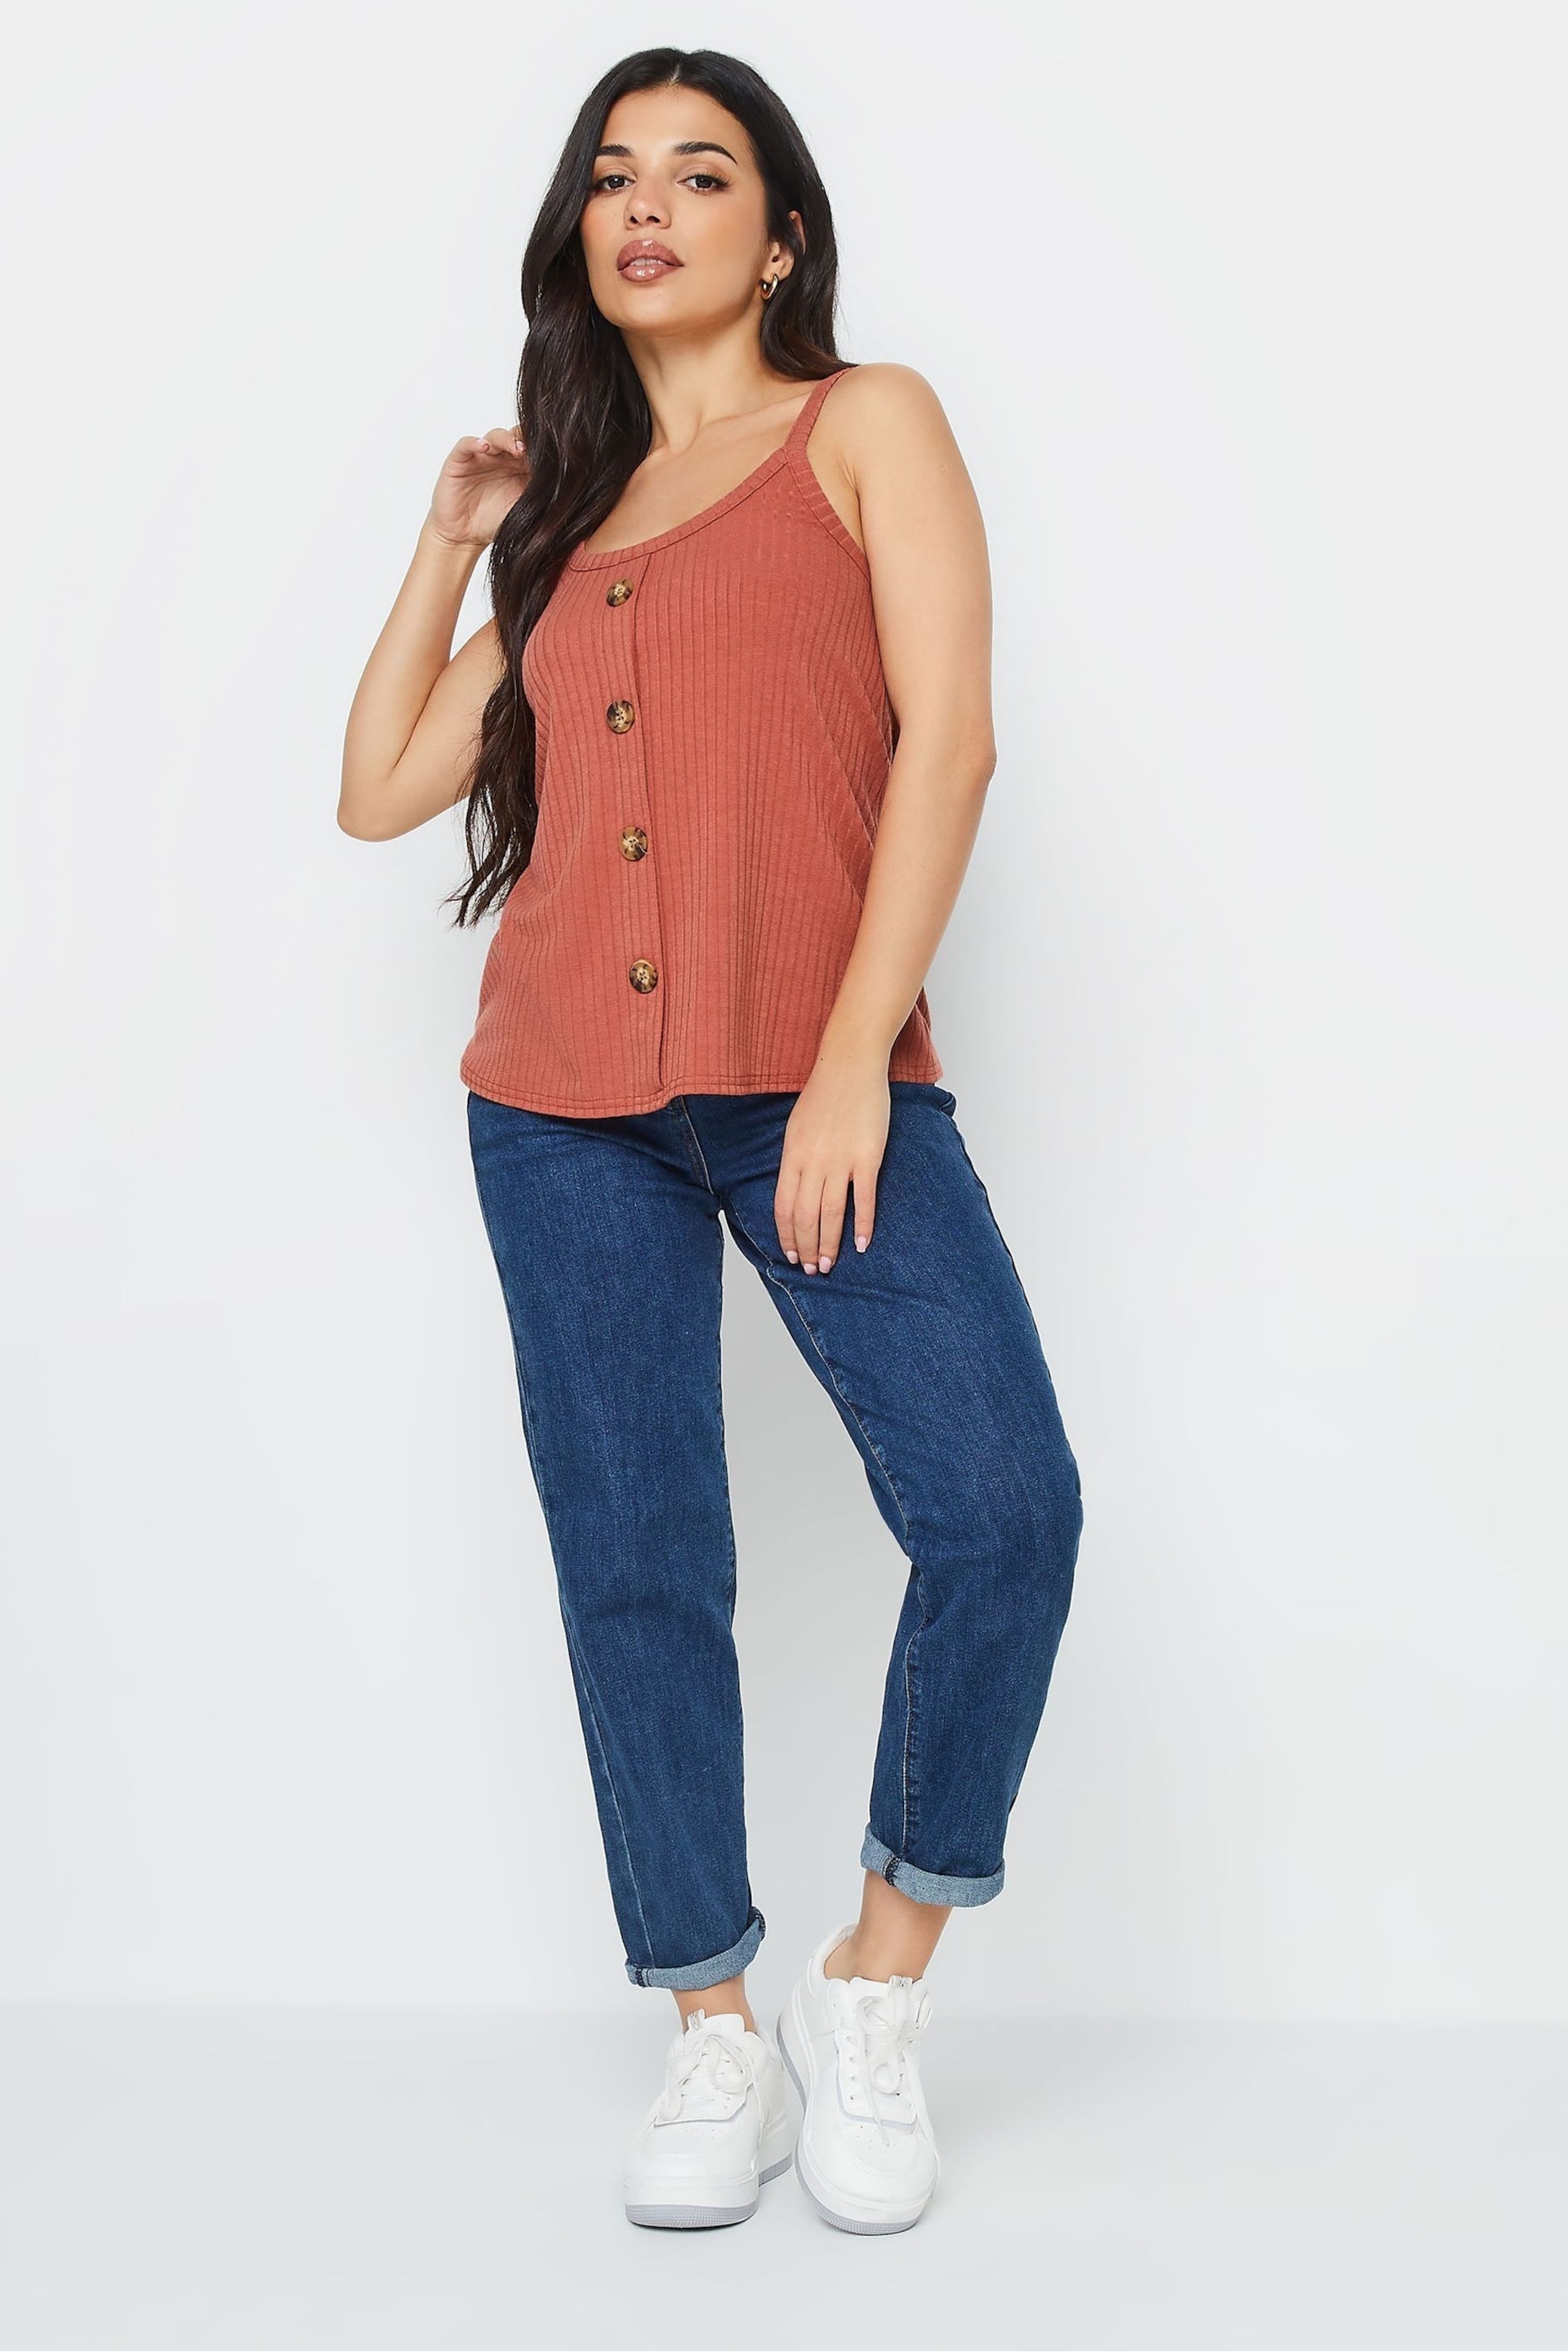 PixieGirl Petite Red Button Down Cami Tops 2 Pack - Image 3 of 6